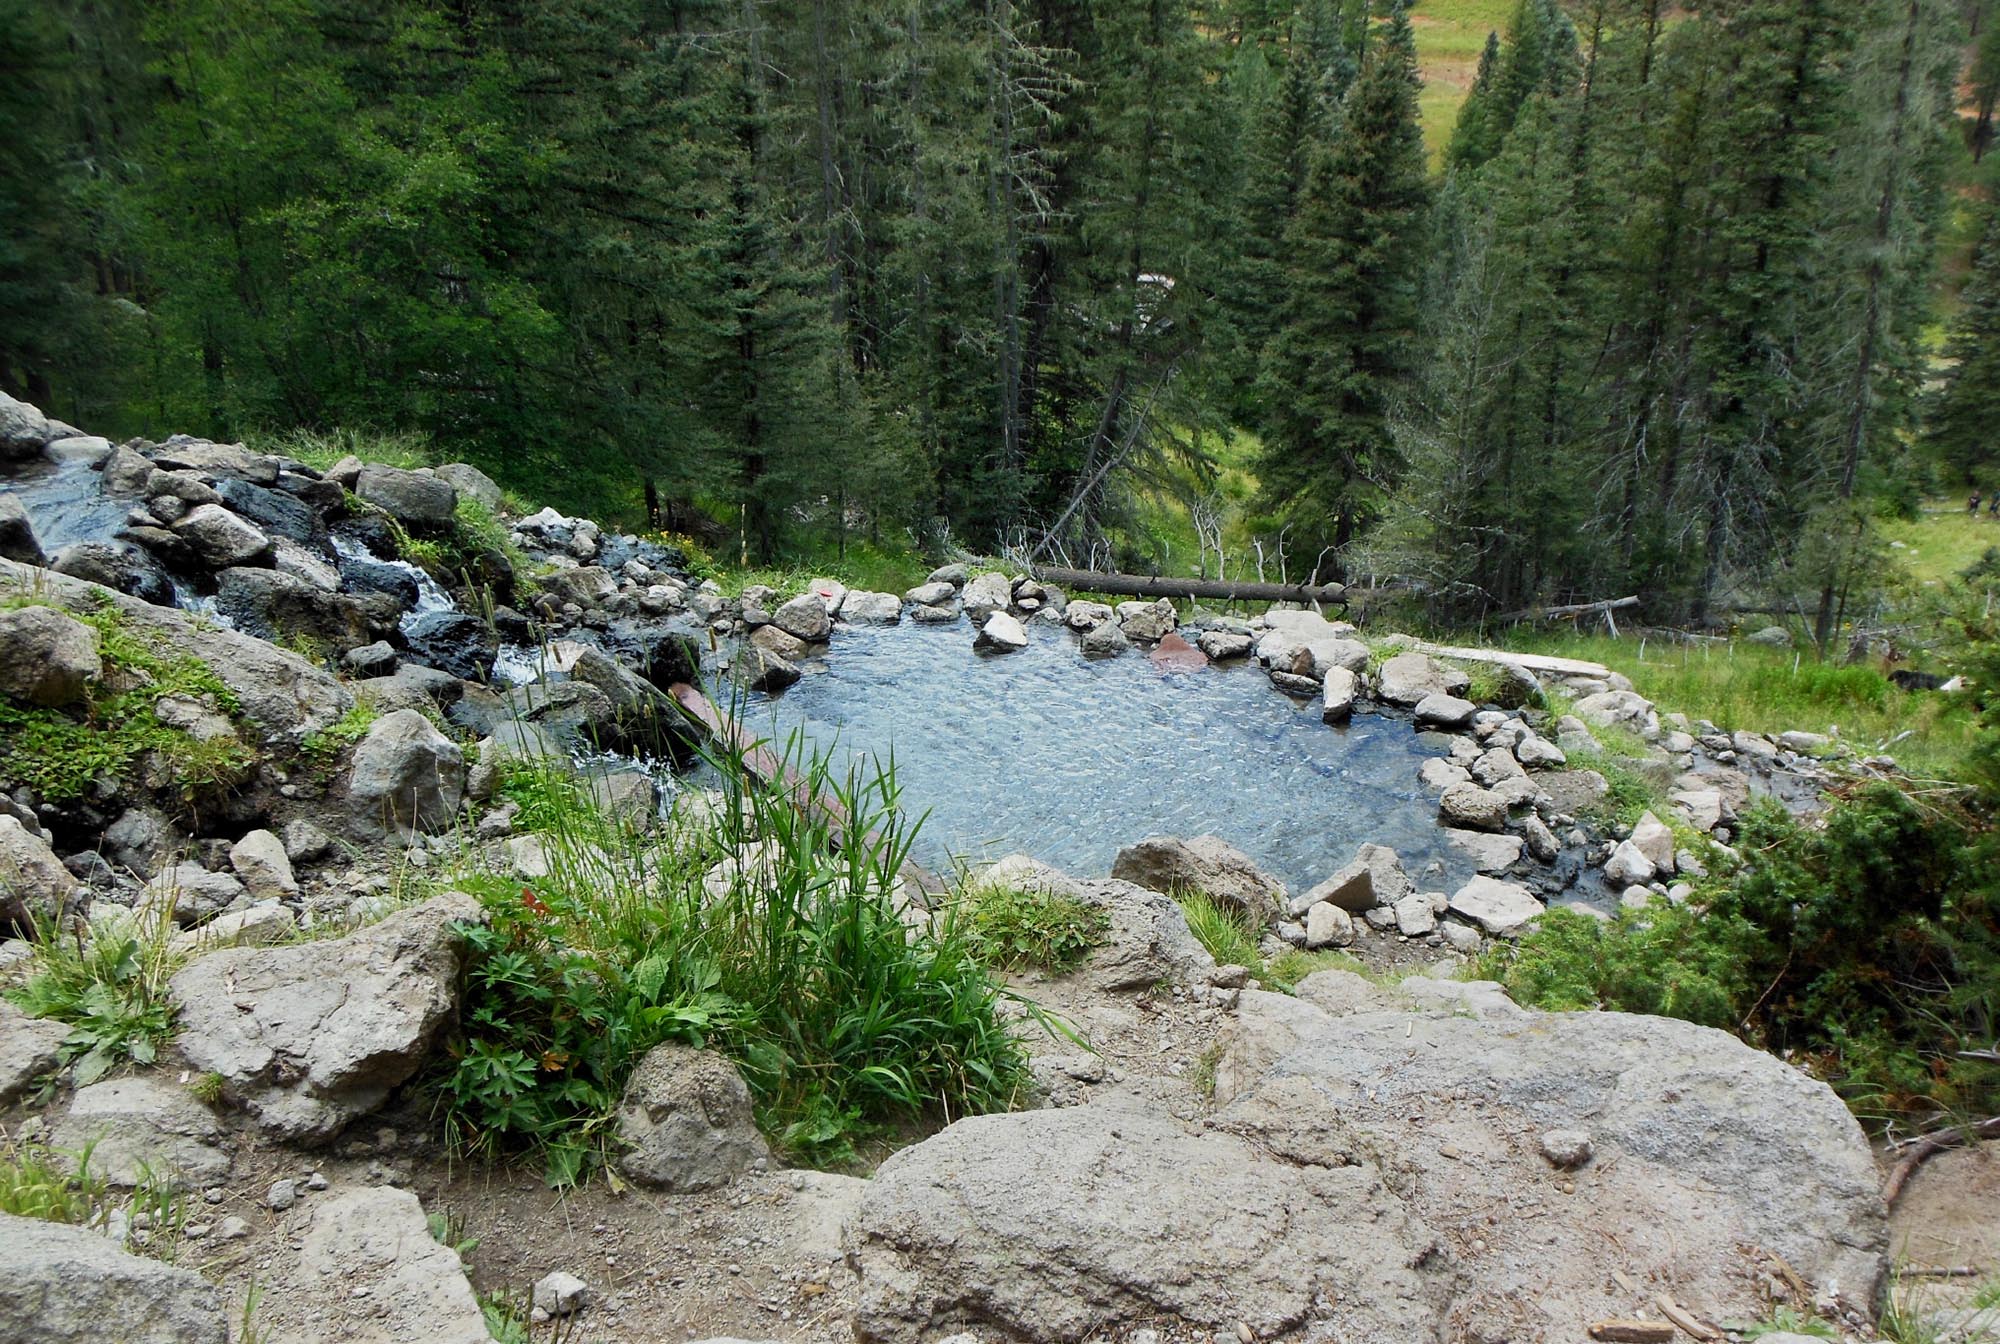 Hike through Santa Fe National Forest to reach this hot spring.